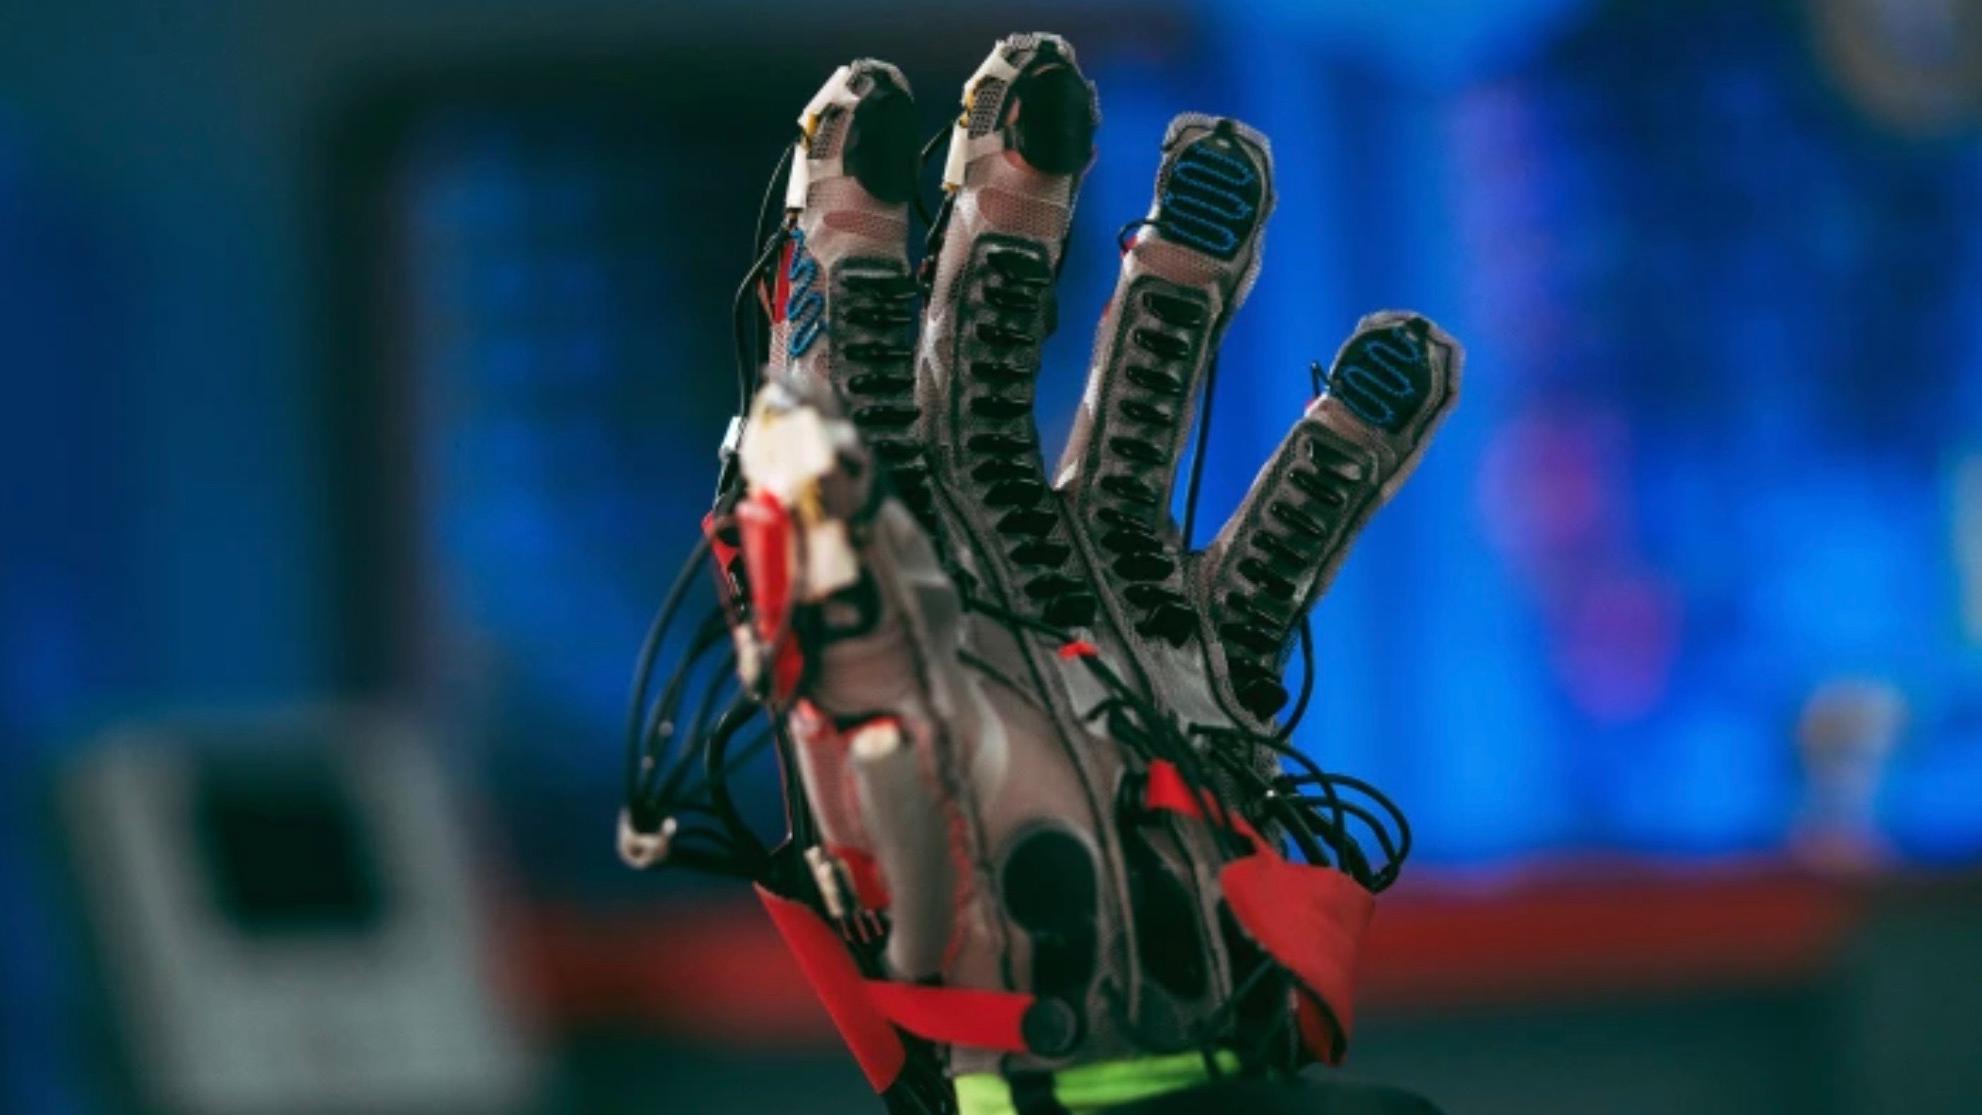 This new glove from Facebook lets you feel objects in VR